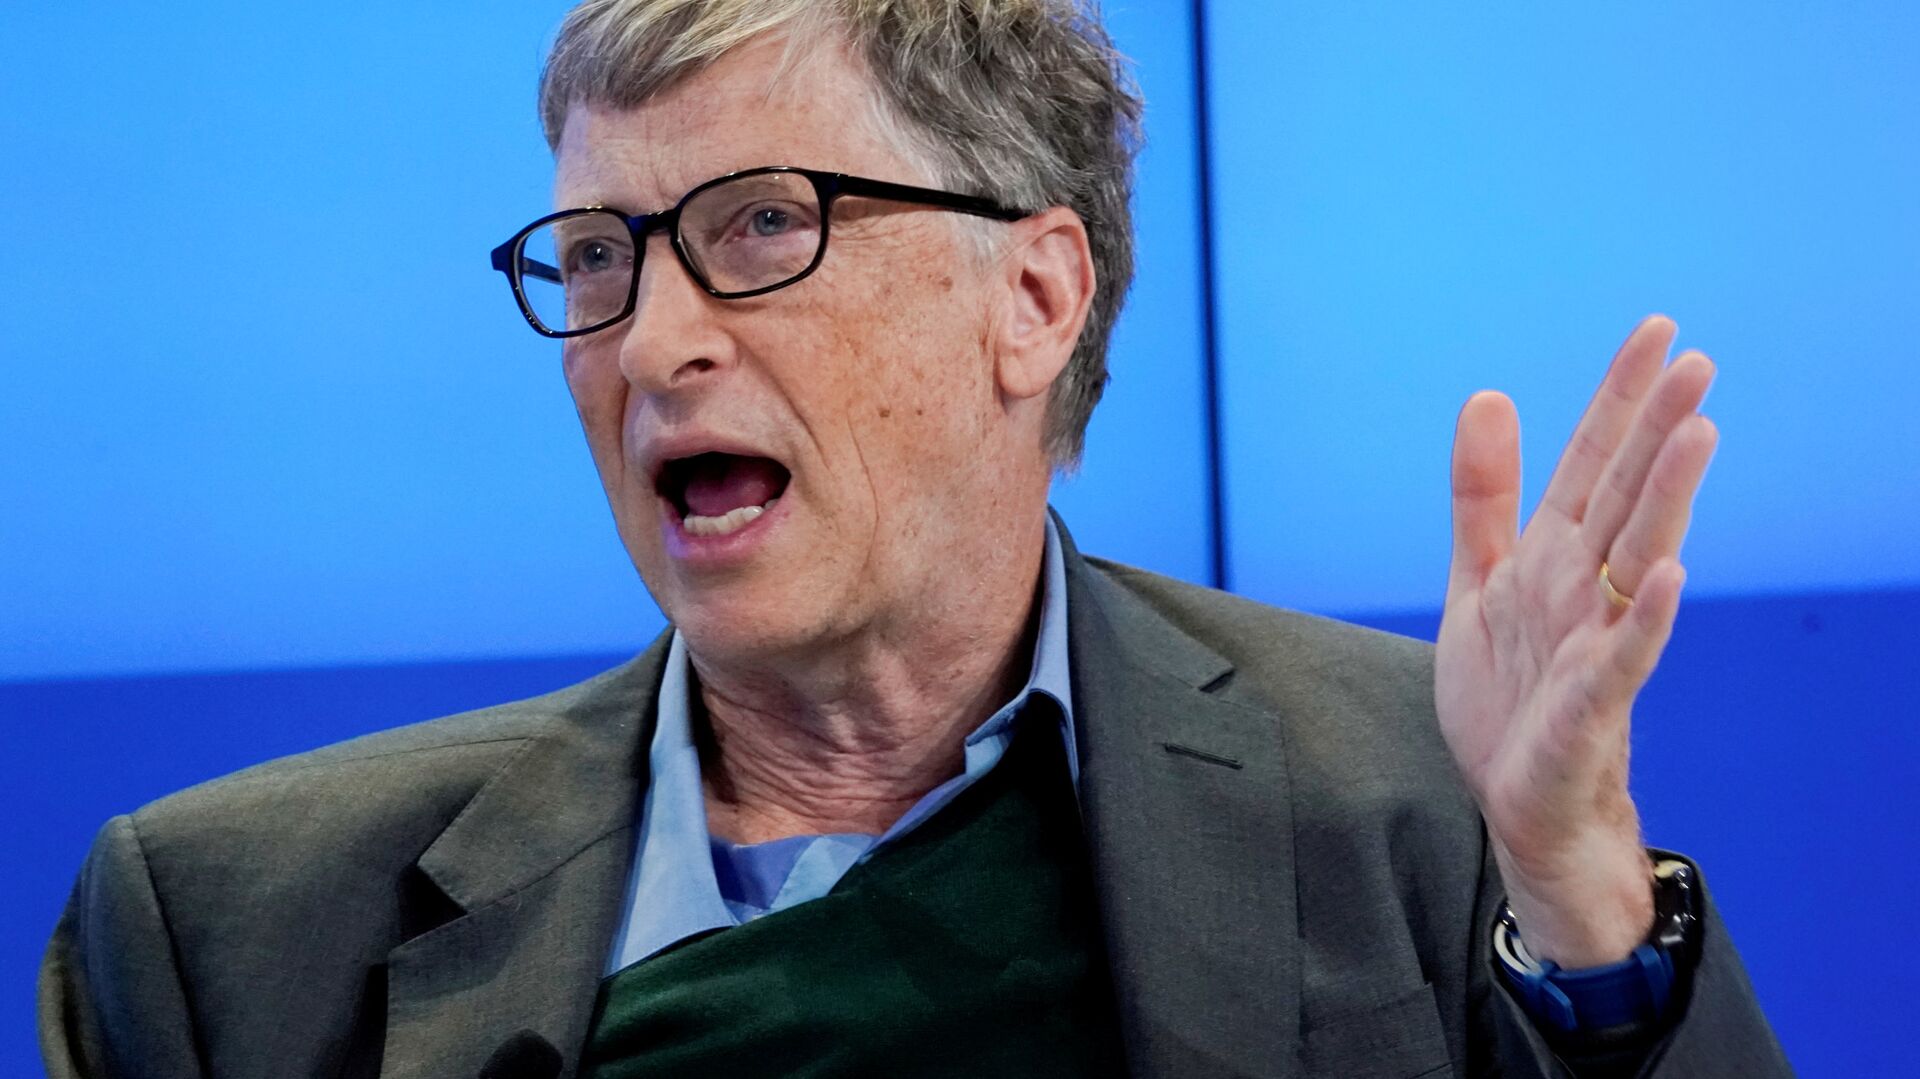  Bill Gates, Co-Chair of Bill & Melinda Gates Foundation, gestures as he speaks during the World Economic Forum (WEF) annual meeting in Davos, Switzerland January 25, 2018 - Sputnik International, 1920, 18.04.2021